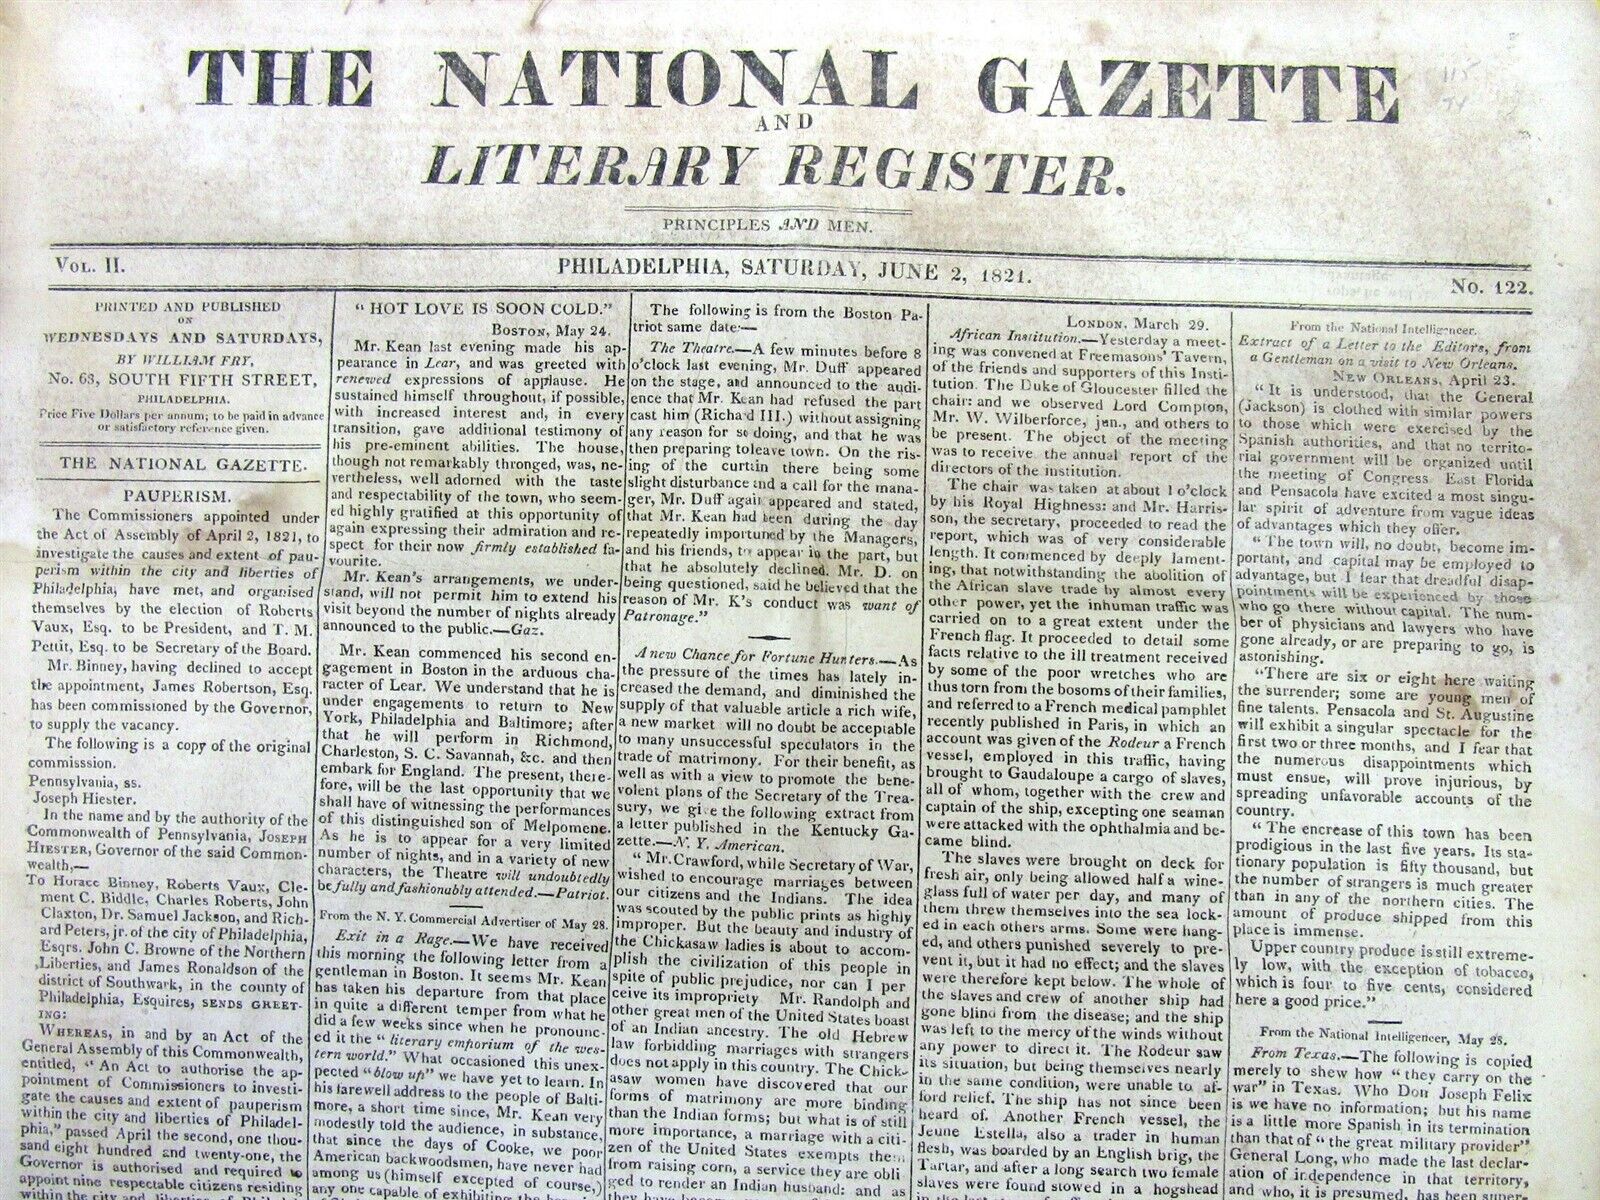 1821 newspaper LONG EXPEDITION - The 1st attempt by Americans to take over TEXAS